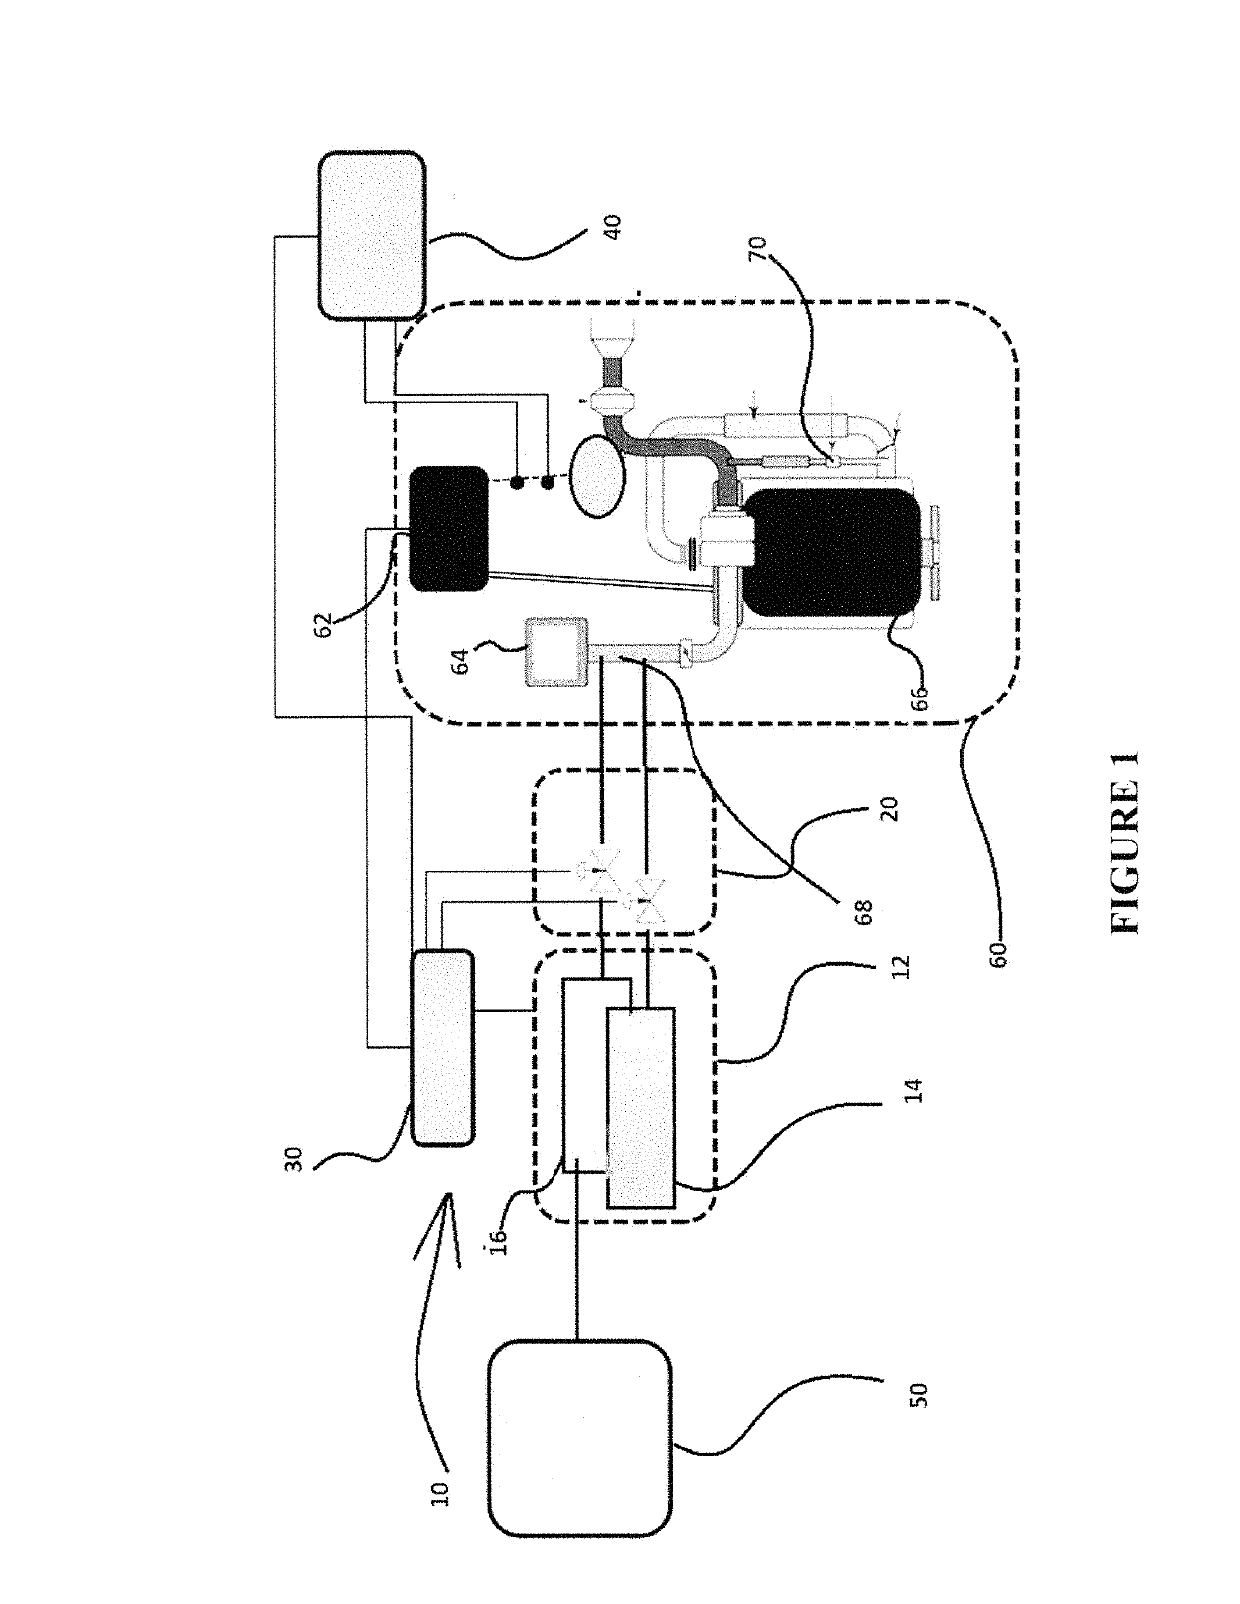 Method and system for improving fuel economy and reducing emissions of internal combustion engines